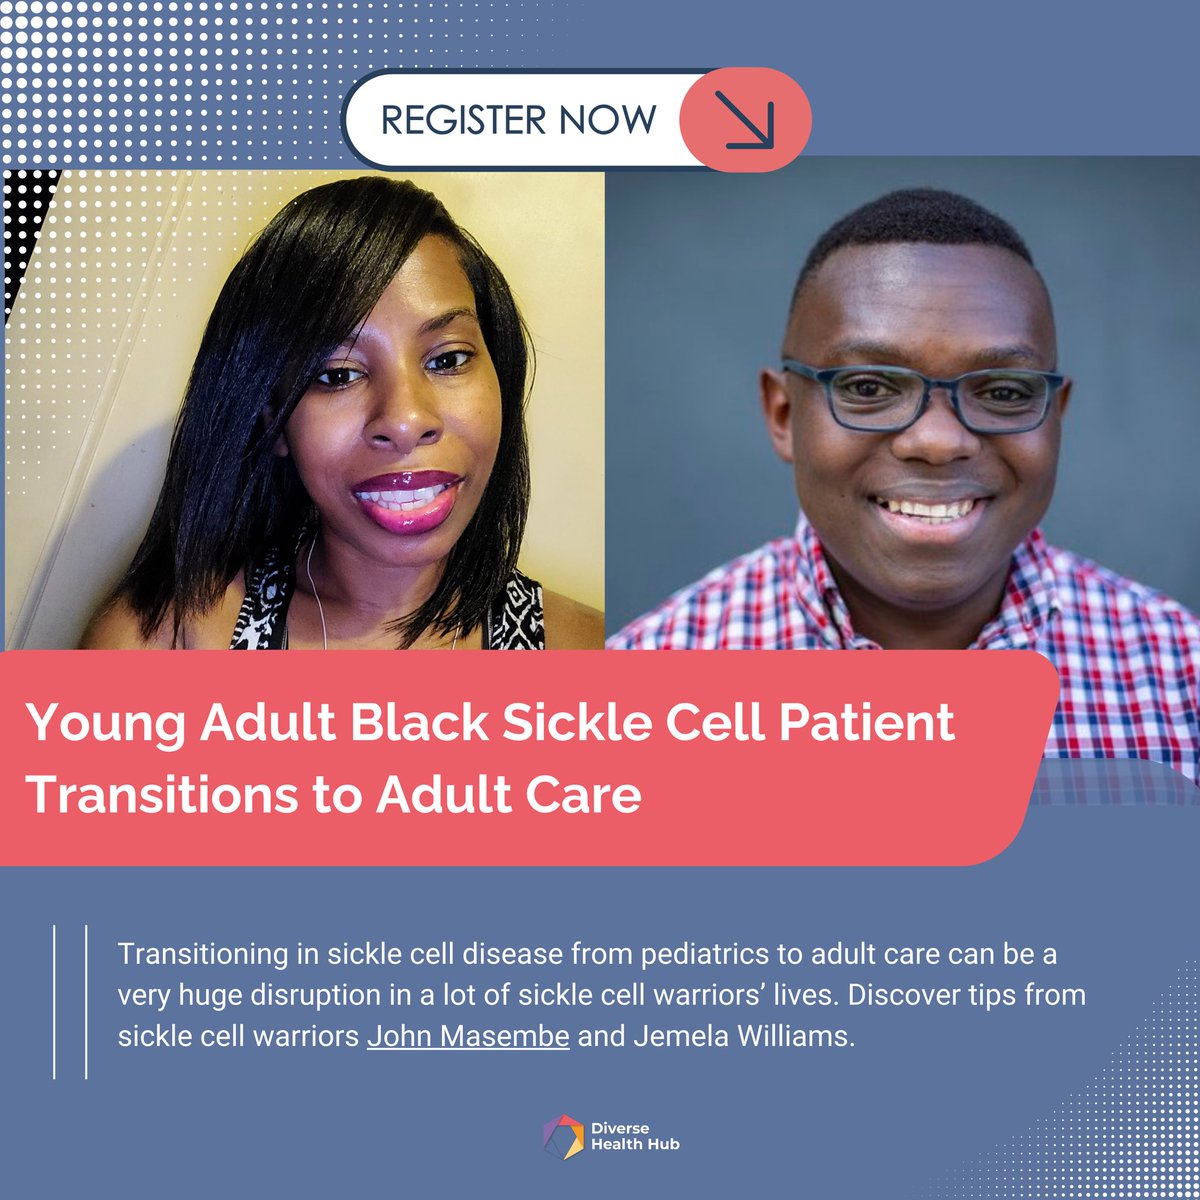 How does race and support impact the #sicklecell pediatric to adult transition? In our #DiagnosticsDecoded 🎥 on 5/9, hear from Warriors John Masembe & Jemela Williams as they share personal experiences and tips on managing this critical change. Register: bit.ly/4a98eNh